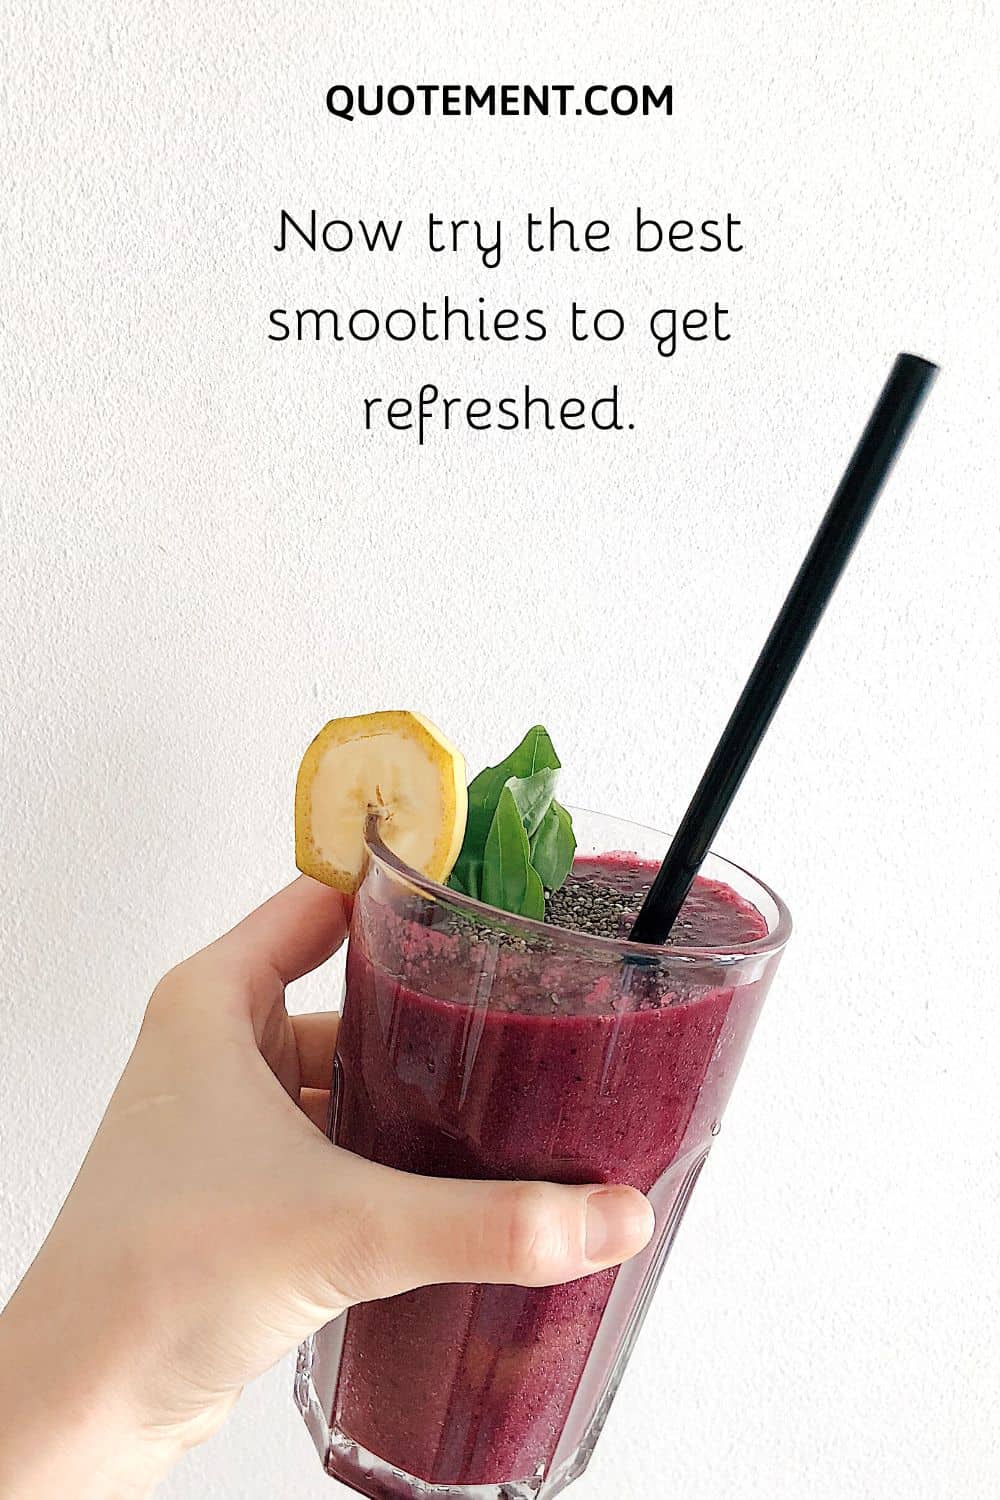 Now try the best smoothies to get refreshed.